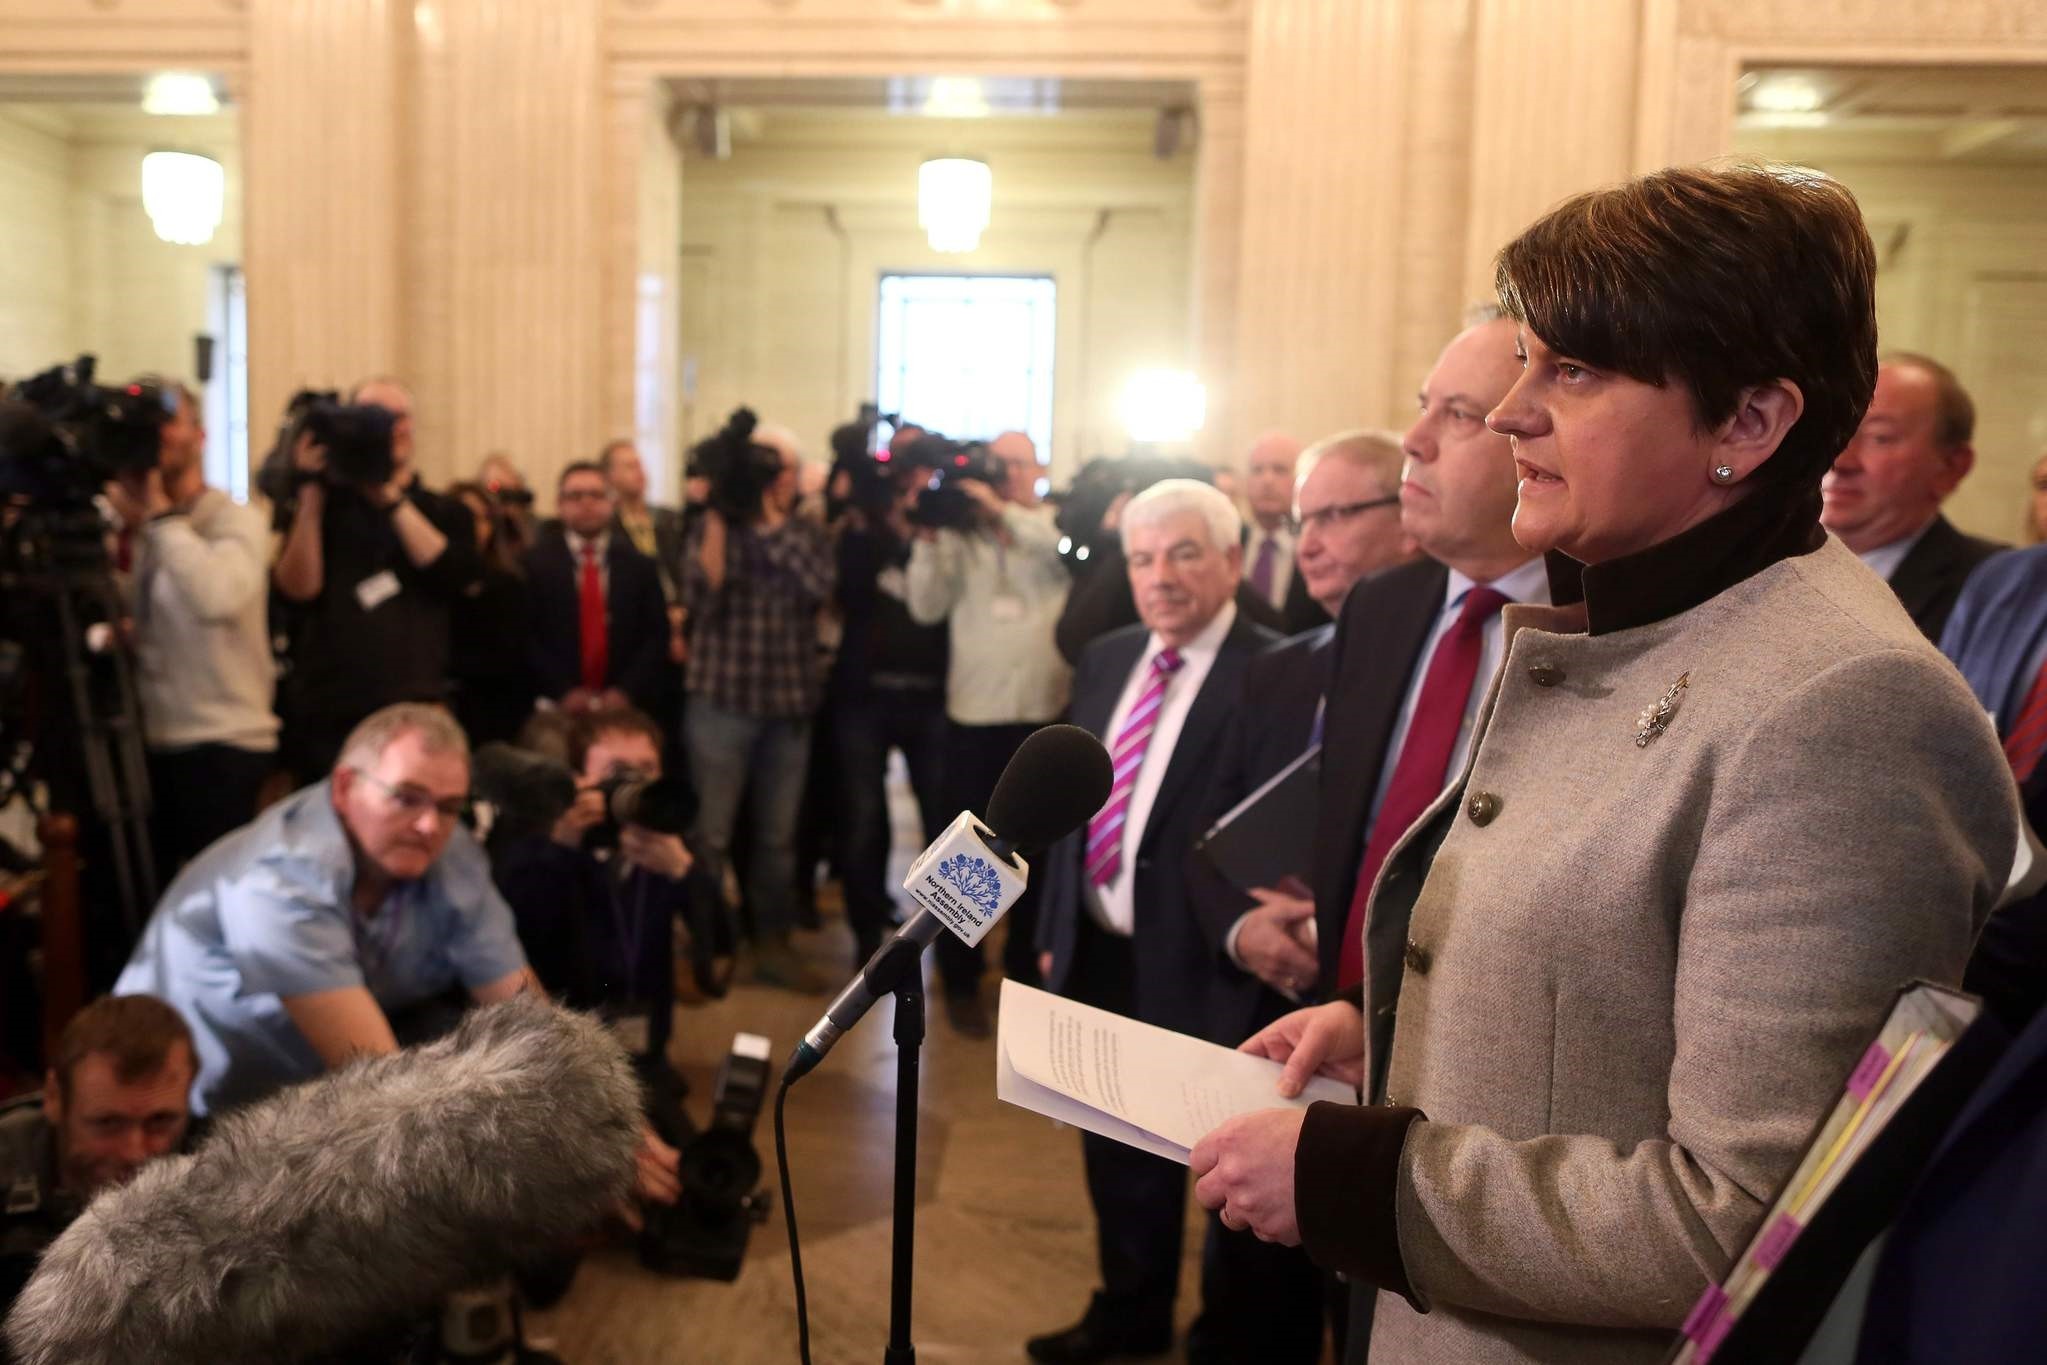 Democratic Unionist Party leader Arlene Foster, speaks to members of the media in the Great Hall at Stormont before the start of the Assembly in Belfast, Northern Ireland. (AFP Photo)